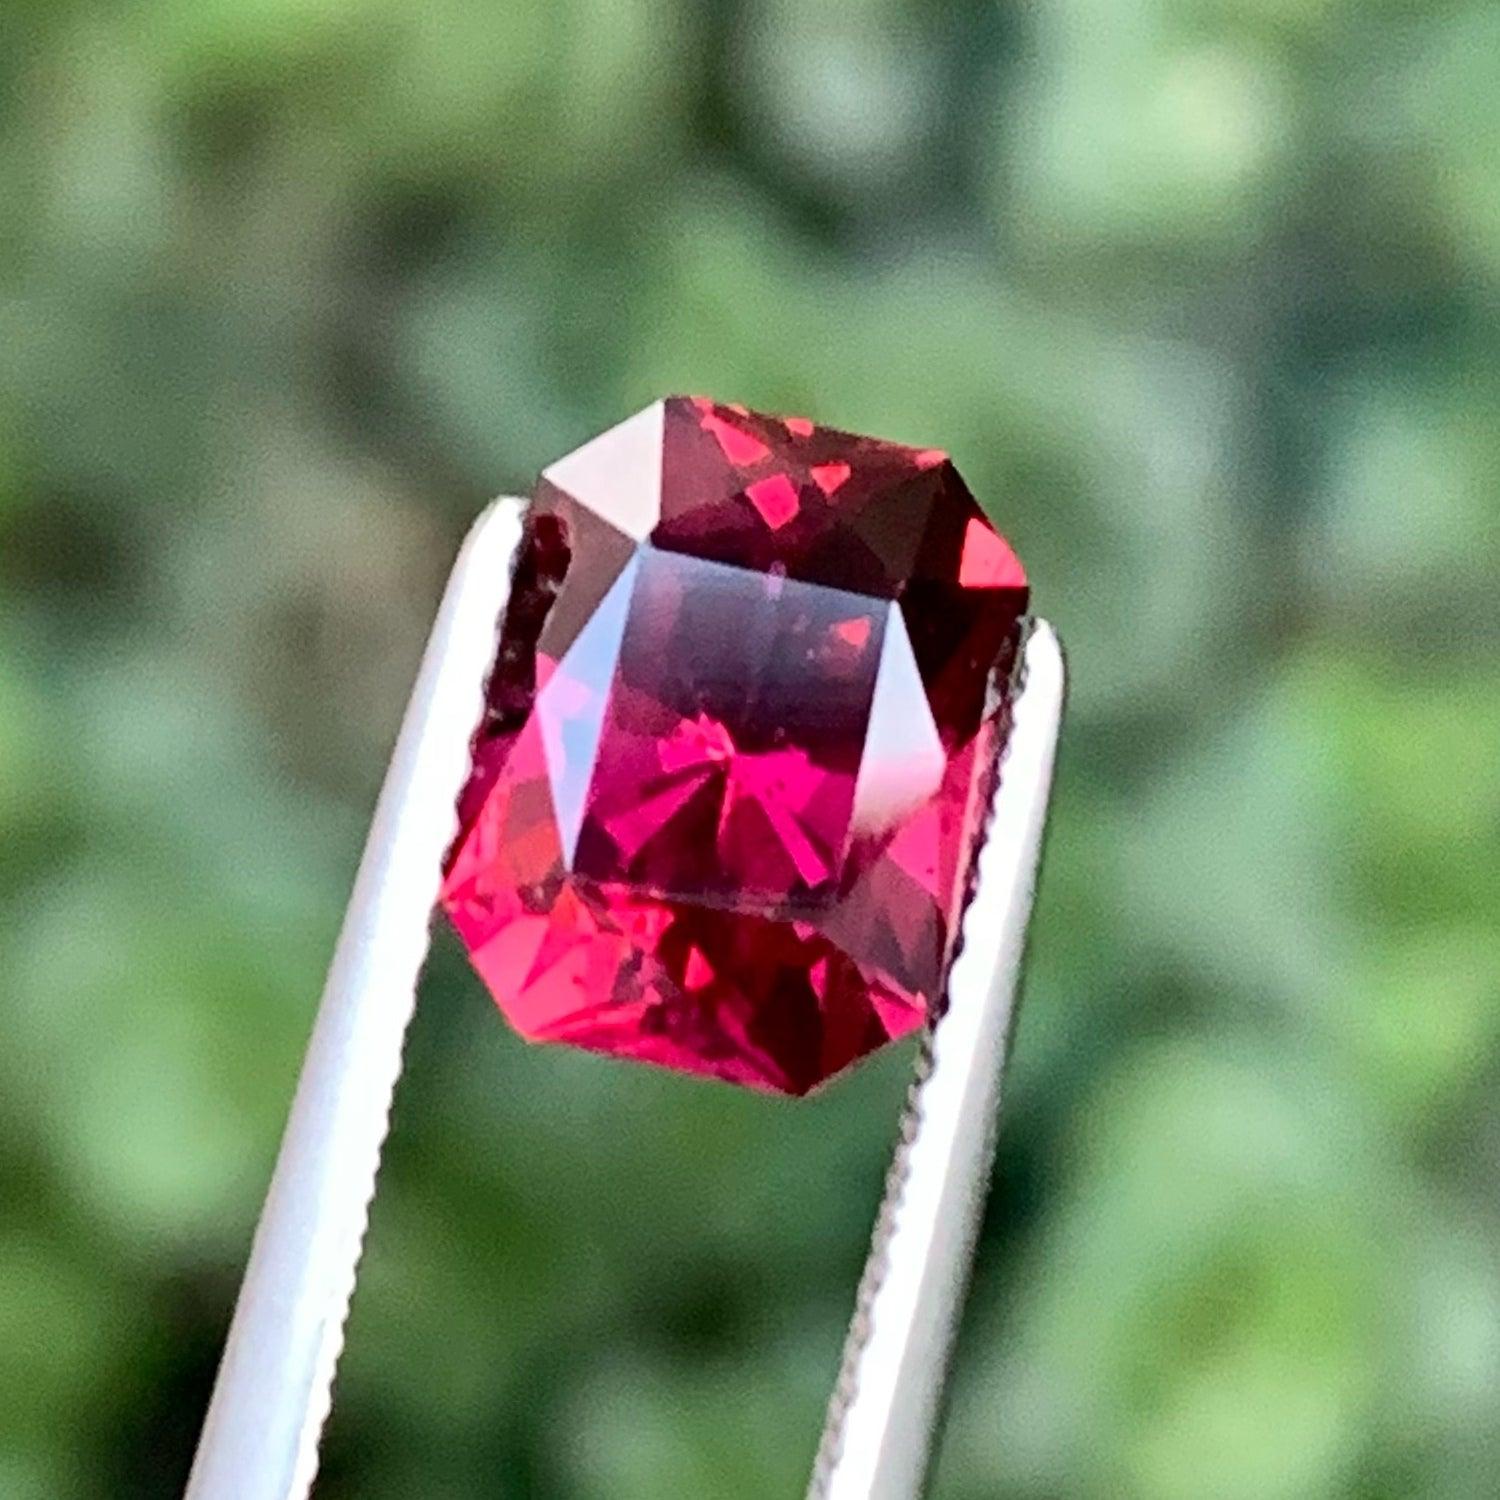 Gorgeous Hot Red Rhodolite Garnet of 3.15 carats from Africa has a wonderful cut in a Octagon shape, incredible Red color, Great brilliance. This gem is VVS Clarity.

 

Product Information:
GEMSTONE NAME: Bright Red Loose Garnet